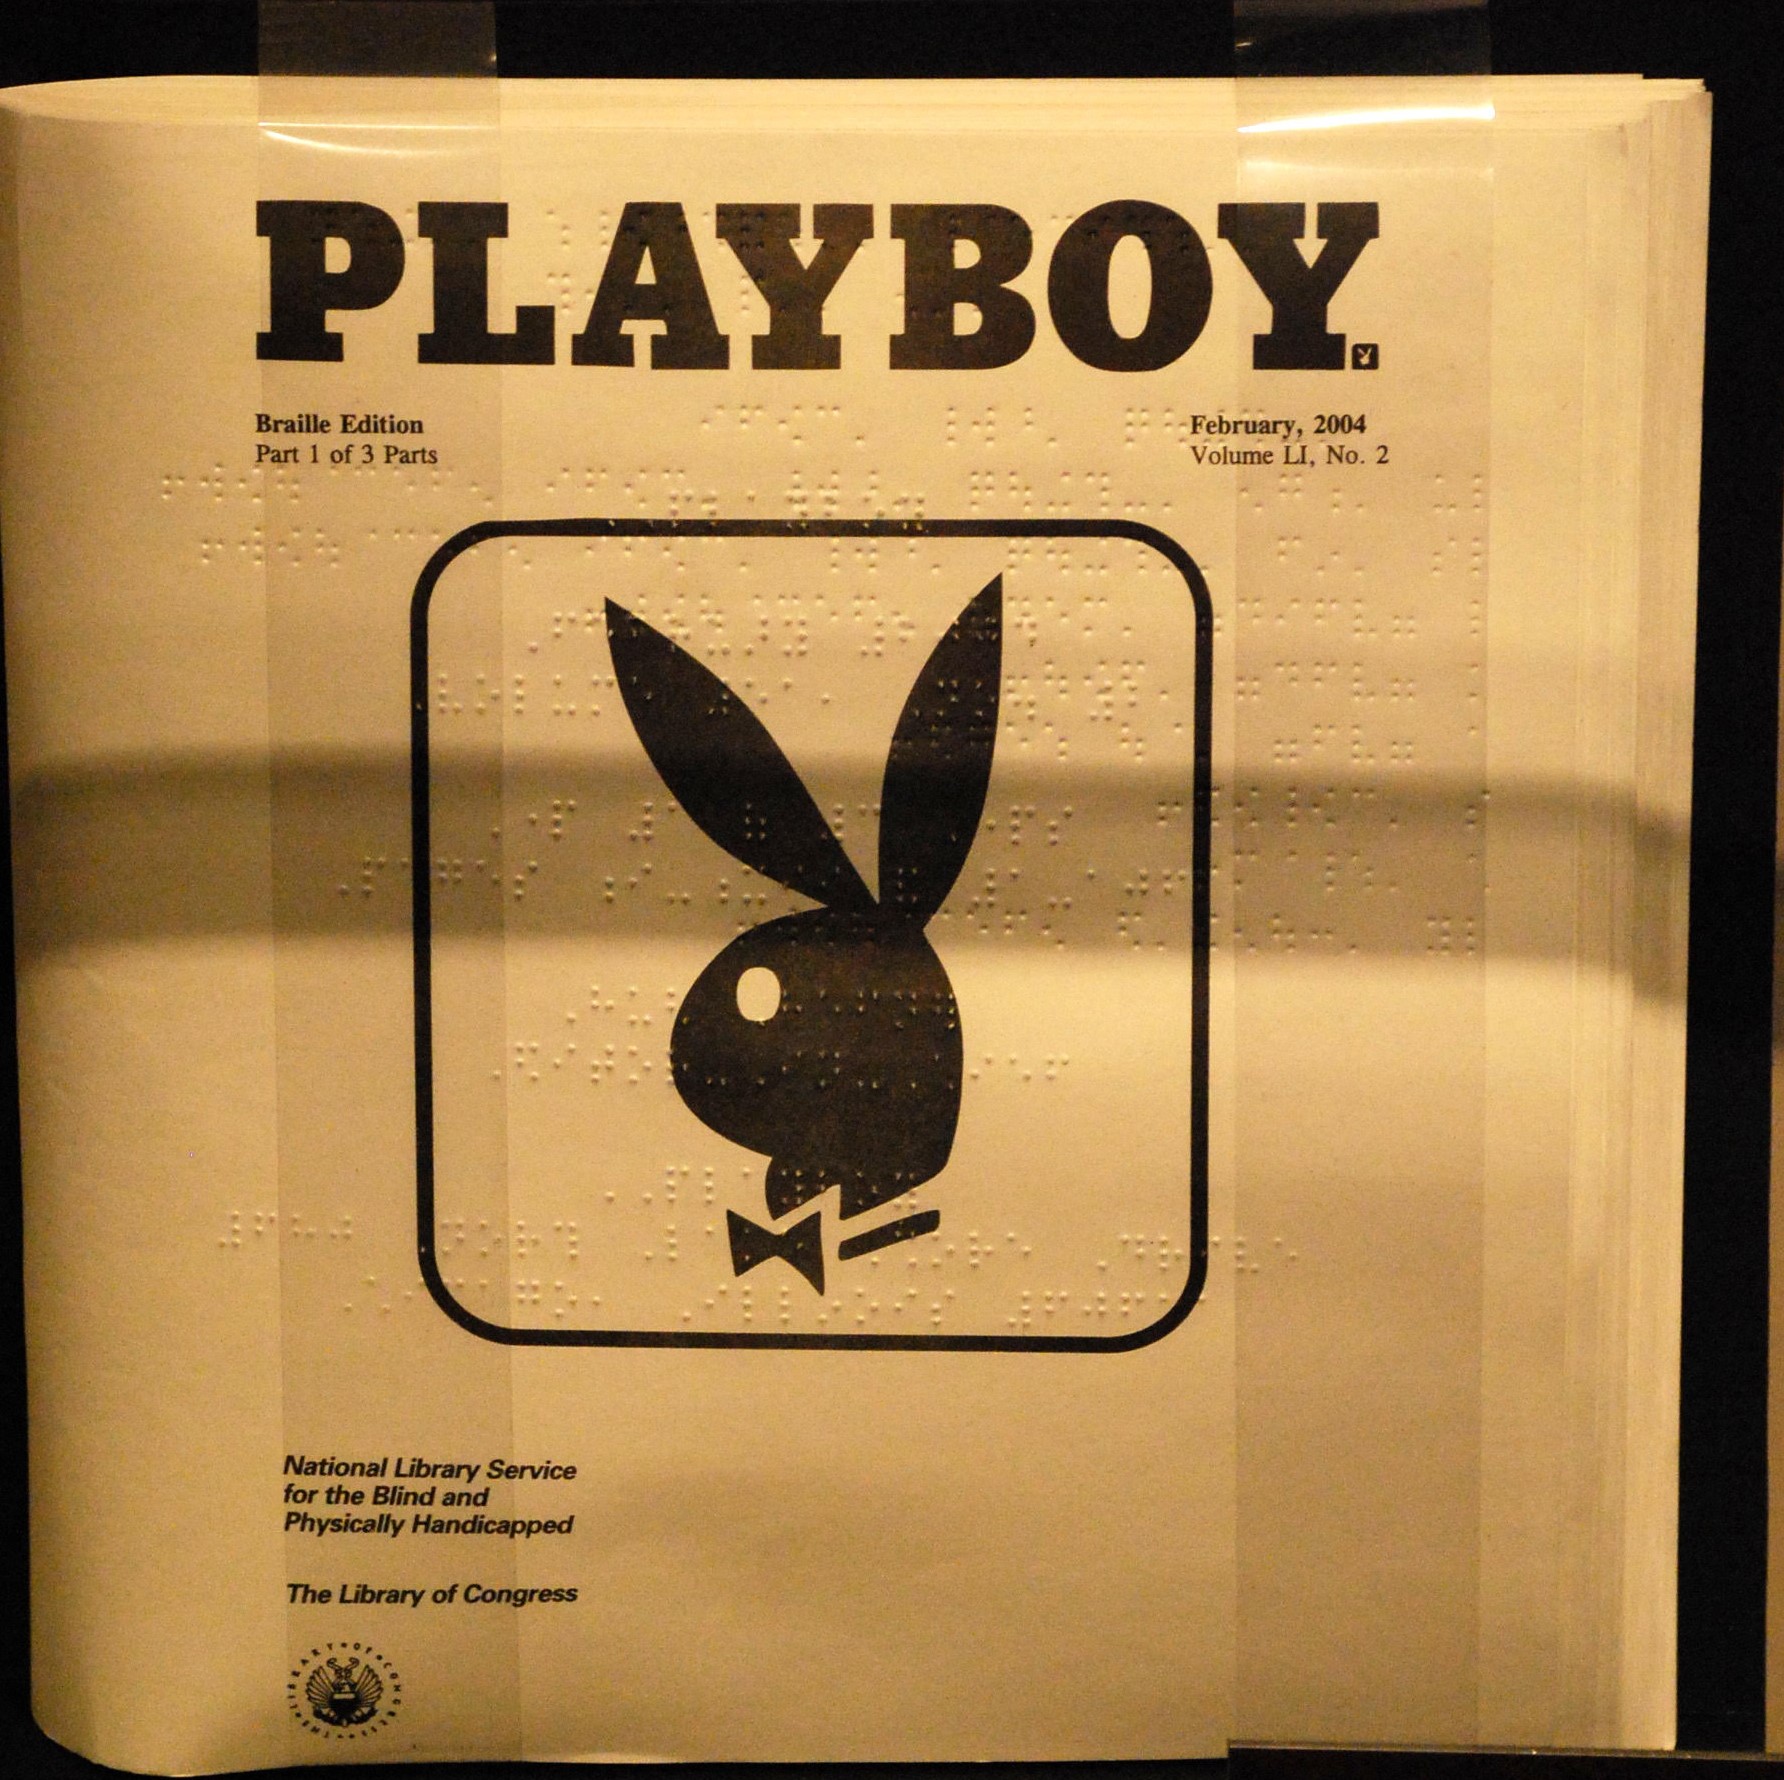 A vesion of playboy magazine in braille, on display at the library of congress.